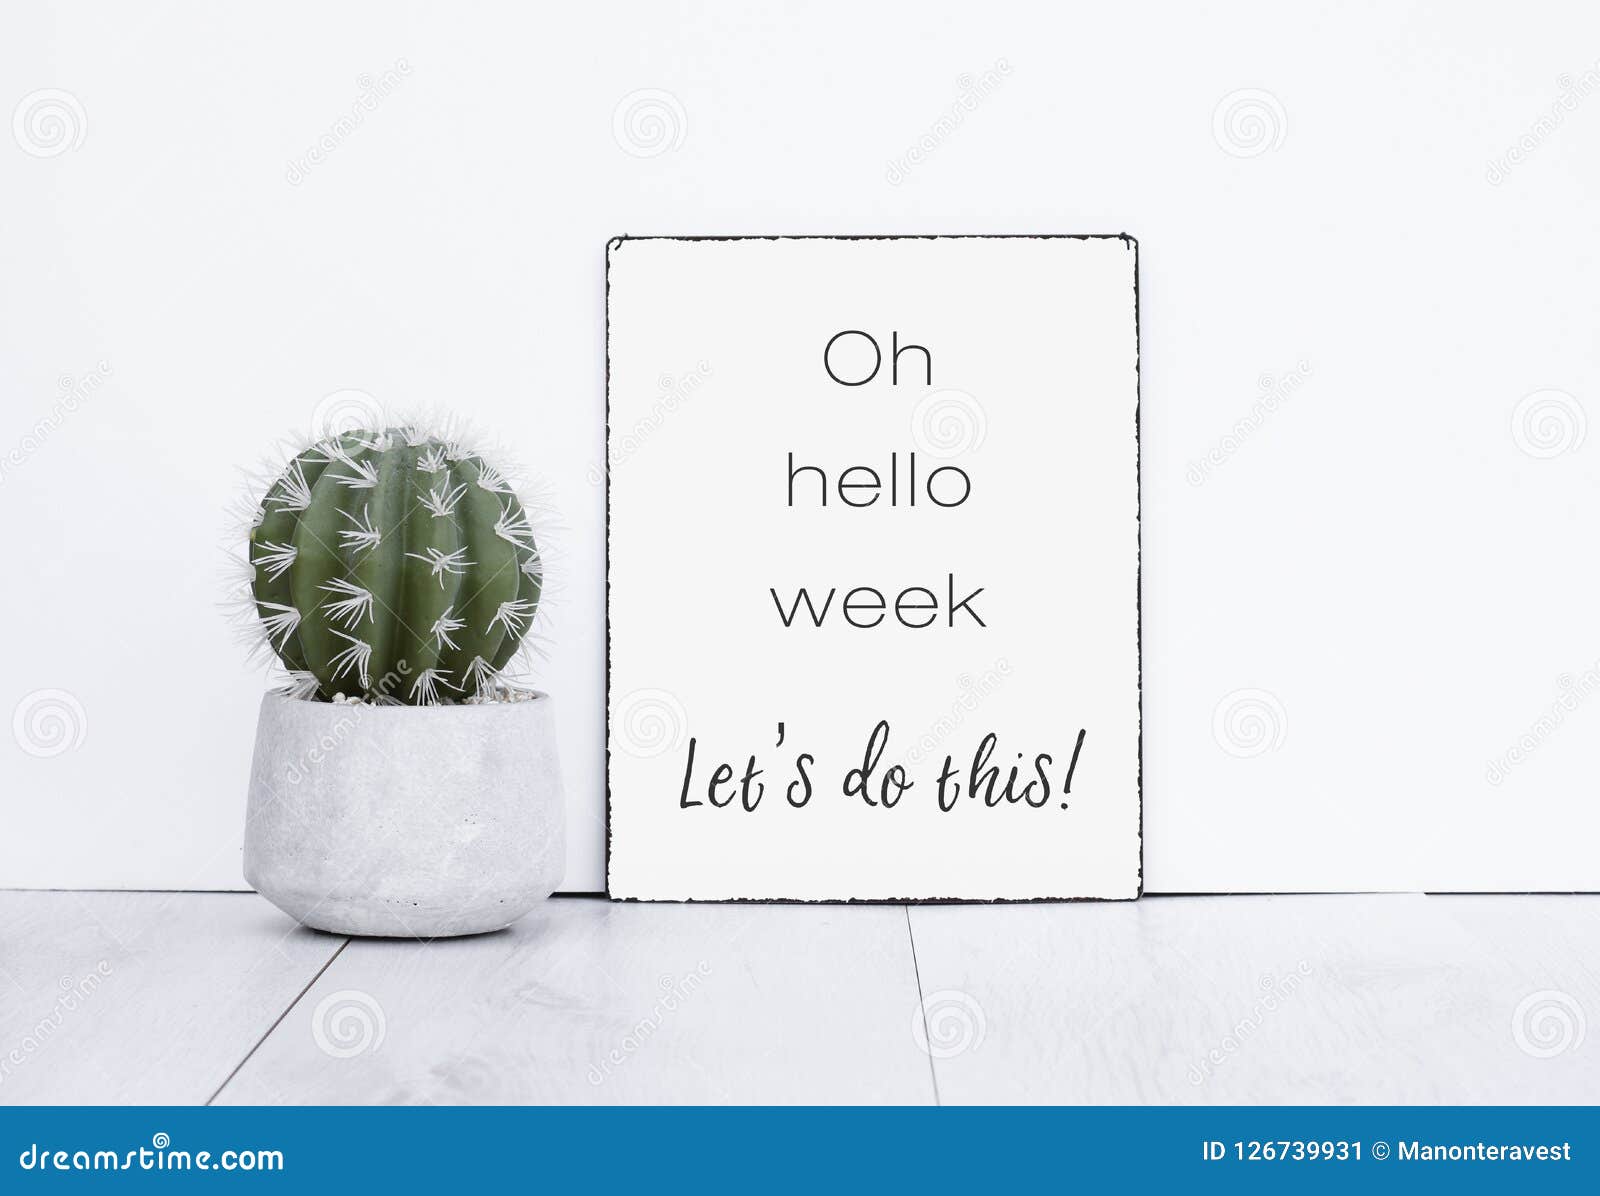 oh hello week let`s do this it text quote motivation for a new w